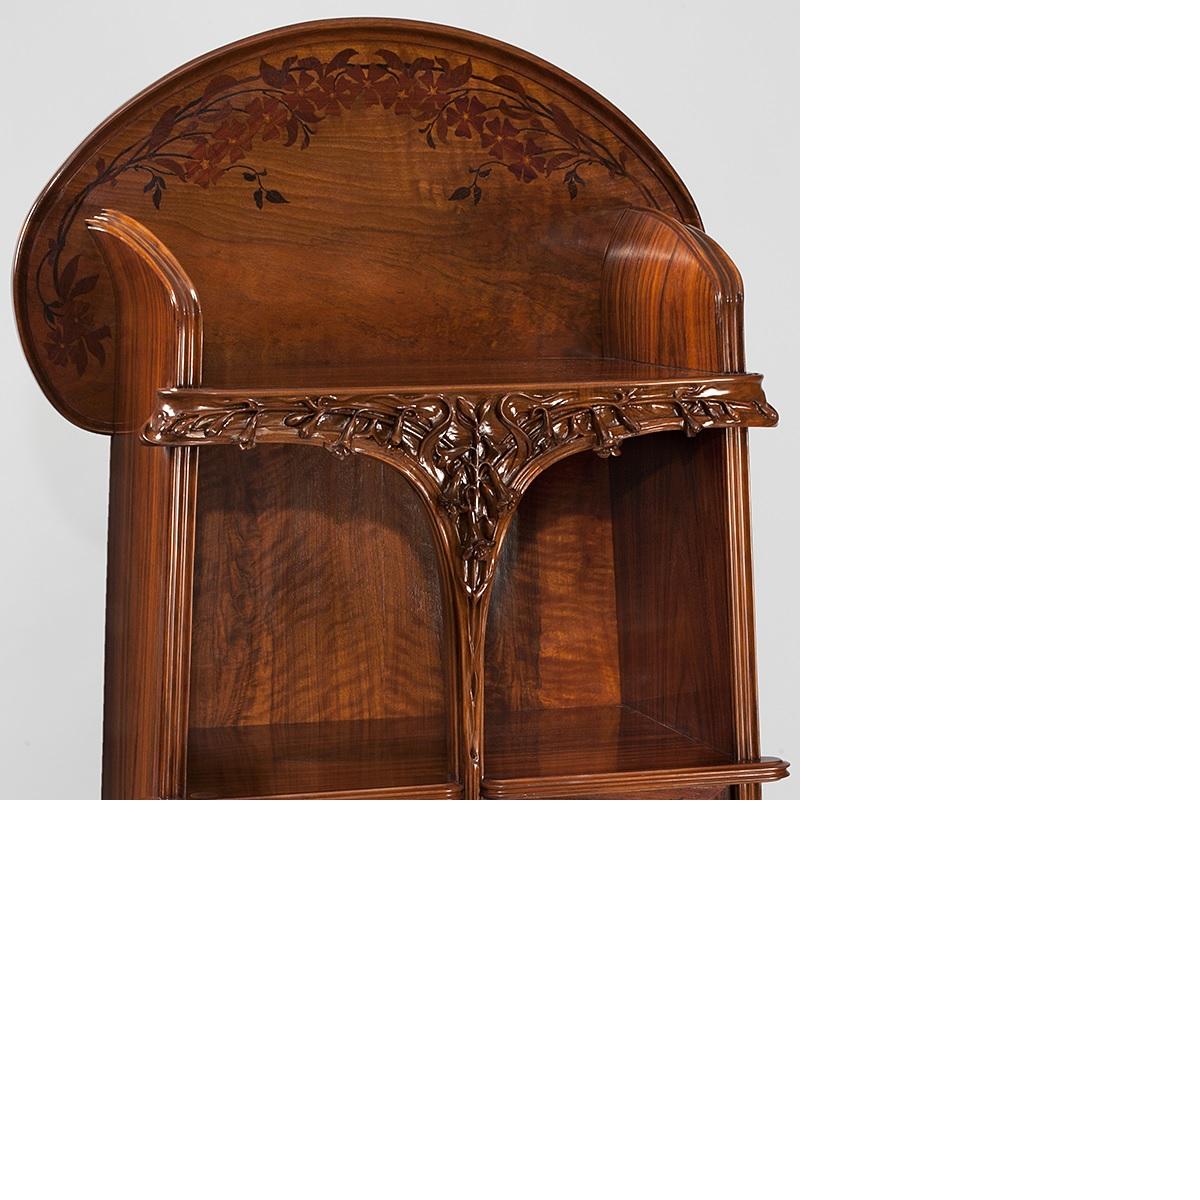 A French Art Nouveau two-door étagère or cabinet with two display areas by Louis Majorelle, featuring extravagant floral woodcarving and flora inlays. The piece also has two lockable cabinet spaces, each with two shelves, circa 1900s.

A similar